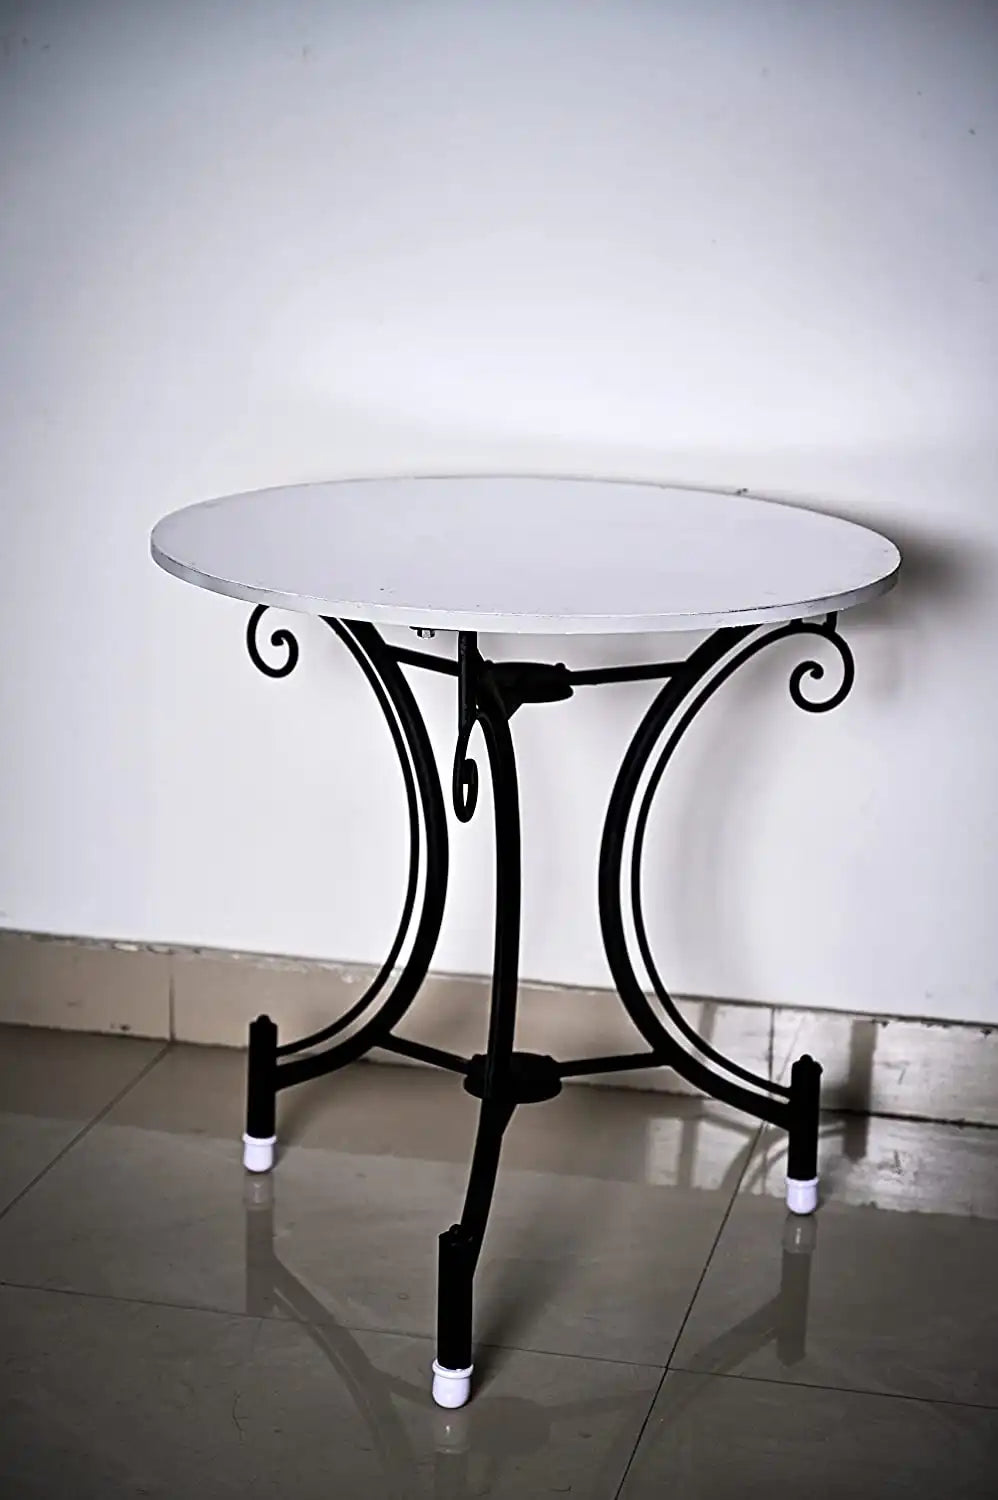 White Iron-Wood Table for Home Decor by Porthomall | Unique Style Tables for unique decorative choices and accent in home